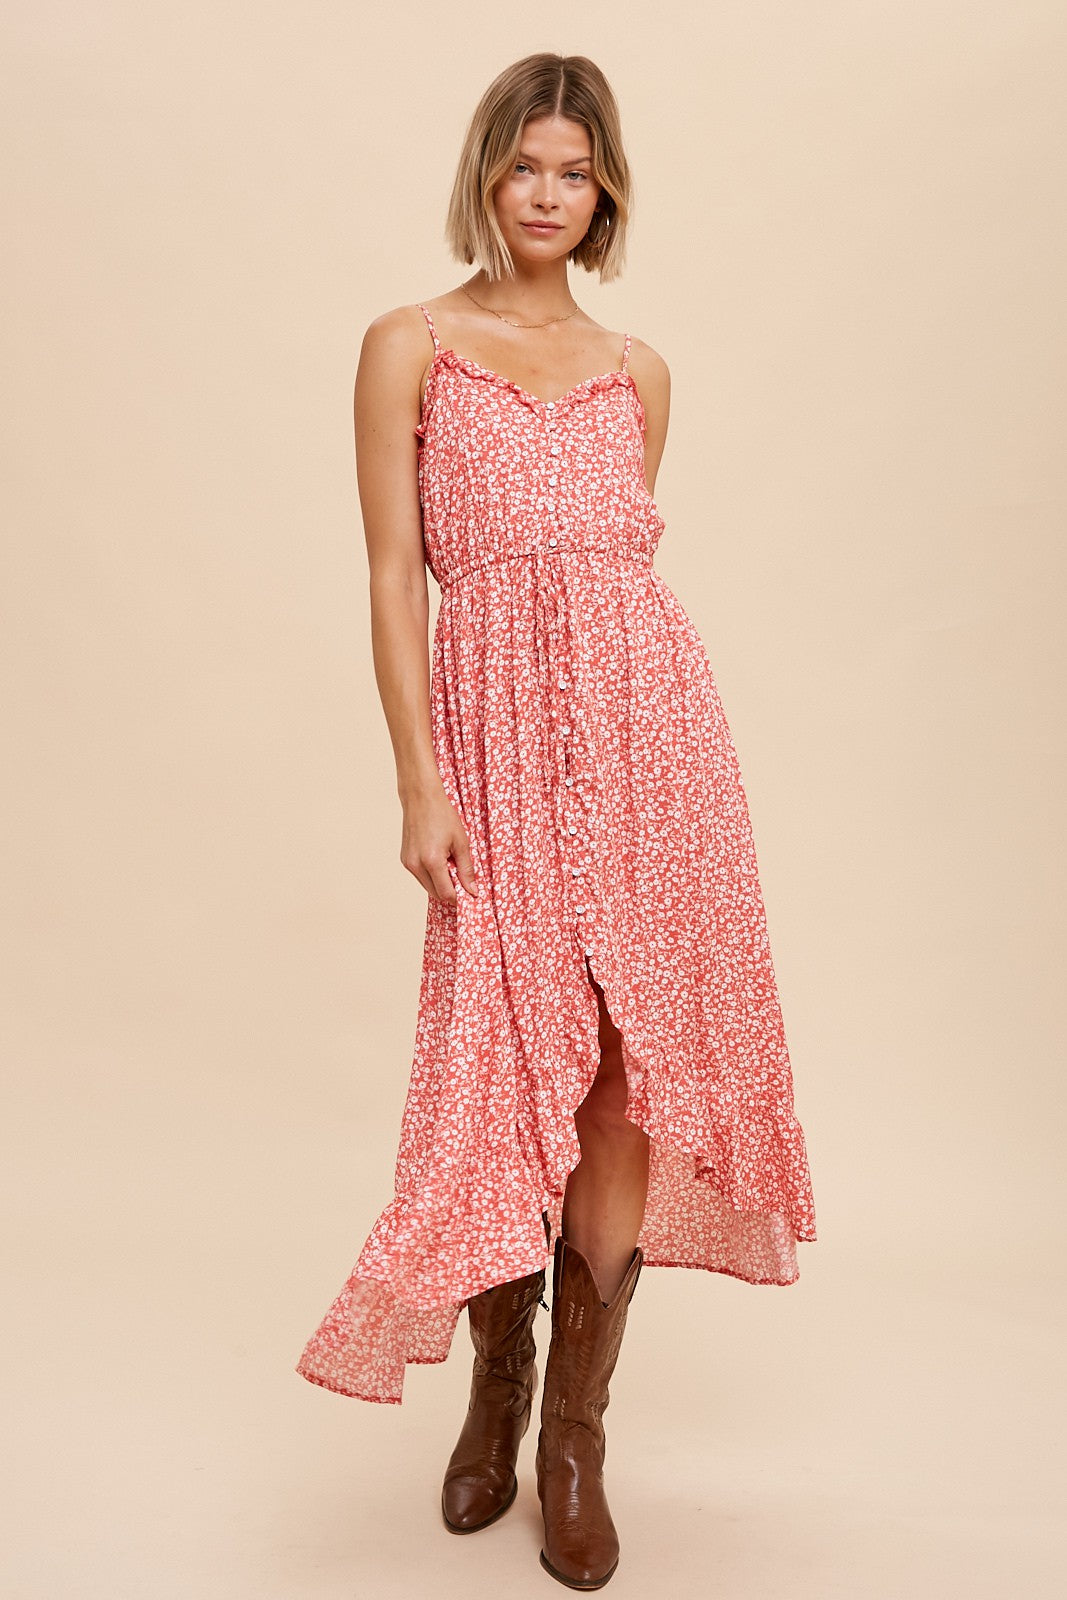 Coral Red Floral Cami Dress